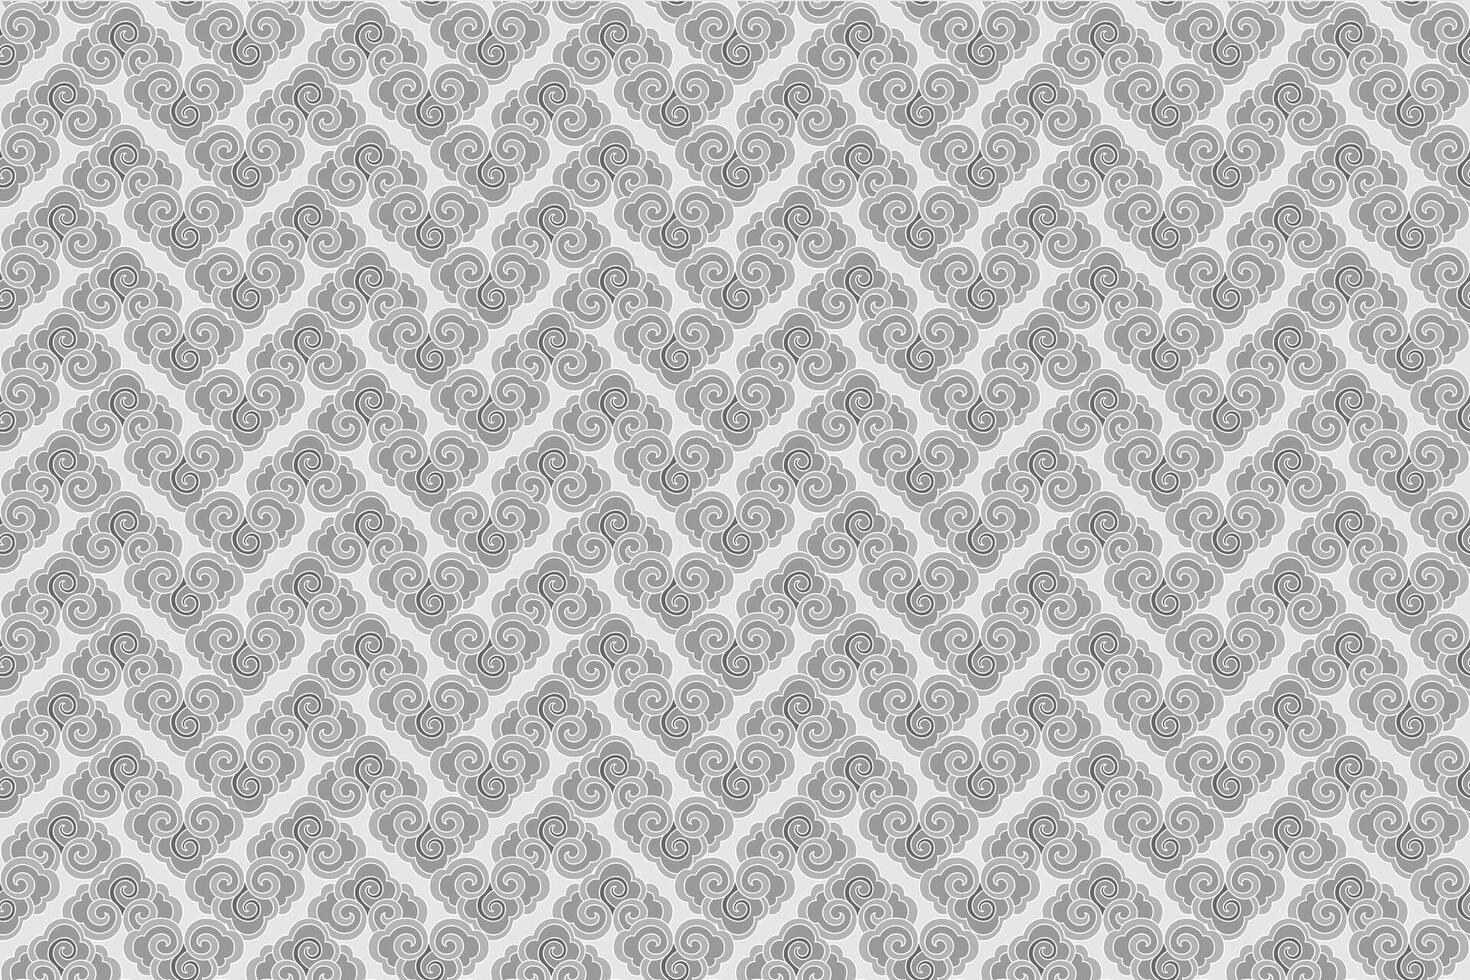 Illustration pattern of the Chinese clouds on light grey background. vector